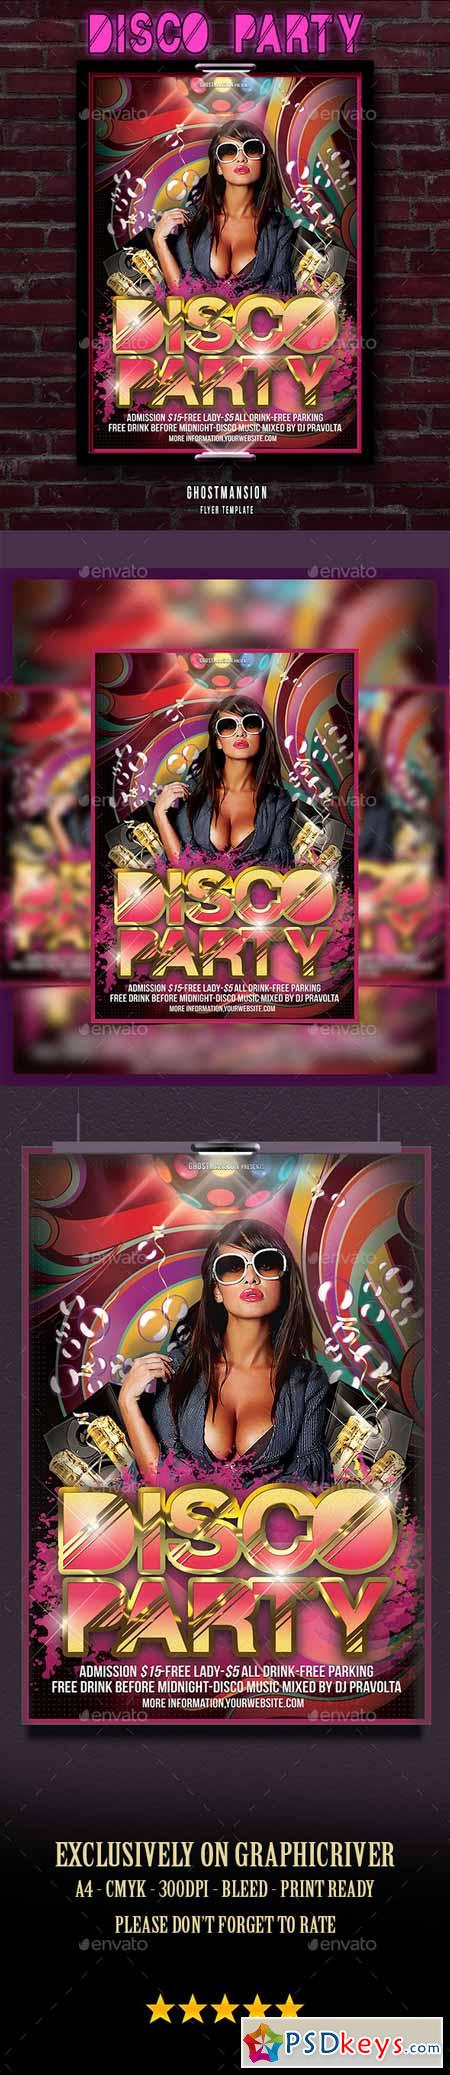 Disco Music Poster Flyer Template 9370286